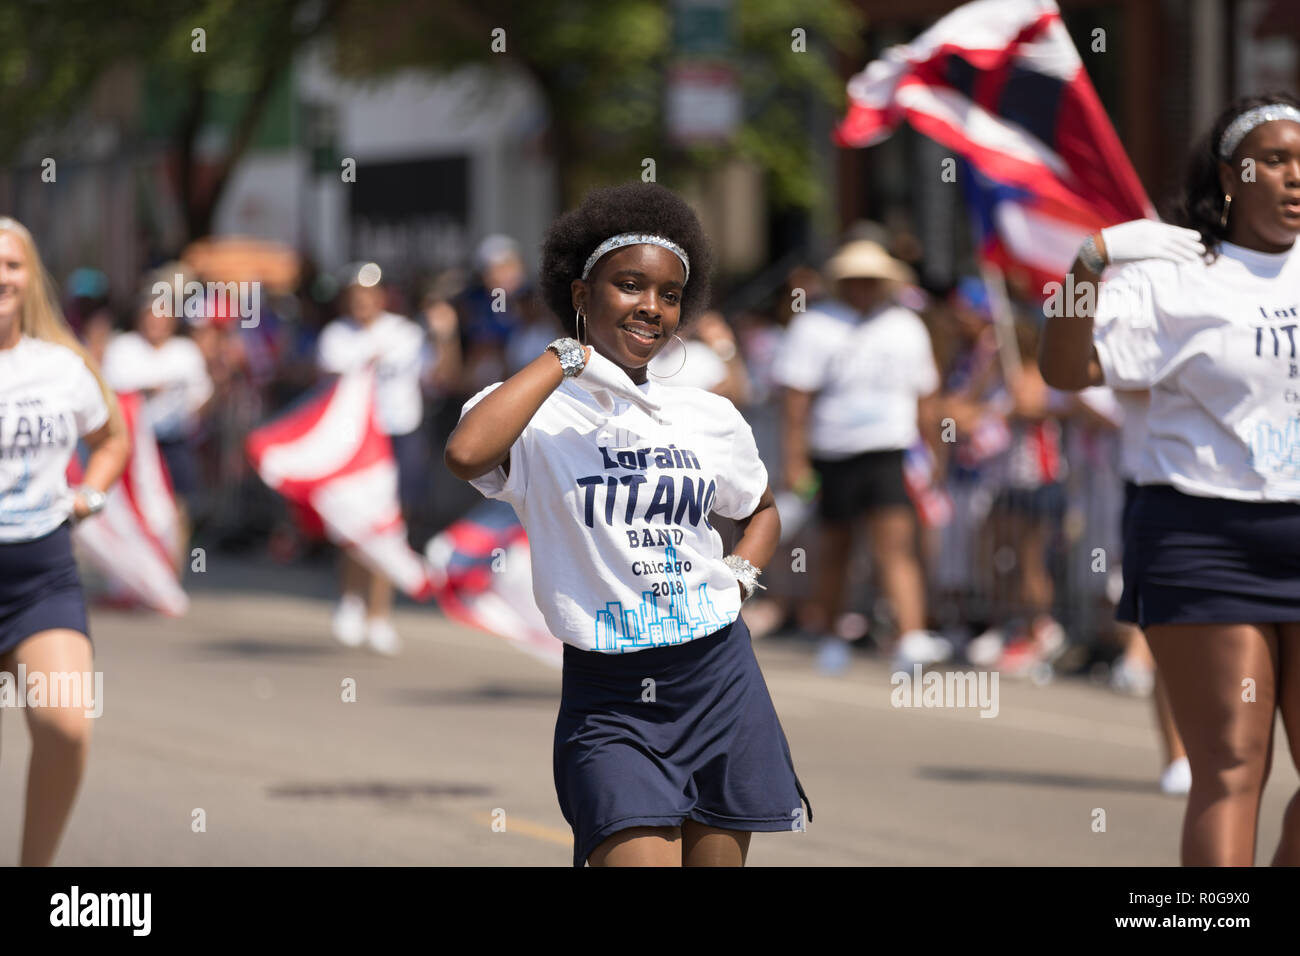 Chicago, Illinois, USA - June 16, 2018: The Puerto Rican People's Parade, Members of the Lorain Titans Band Chicago performing at the parade Stock Photo